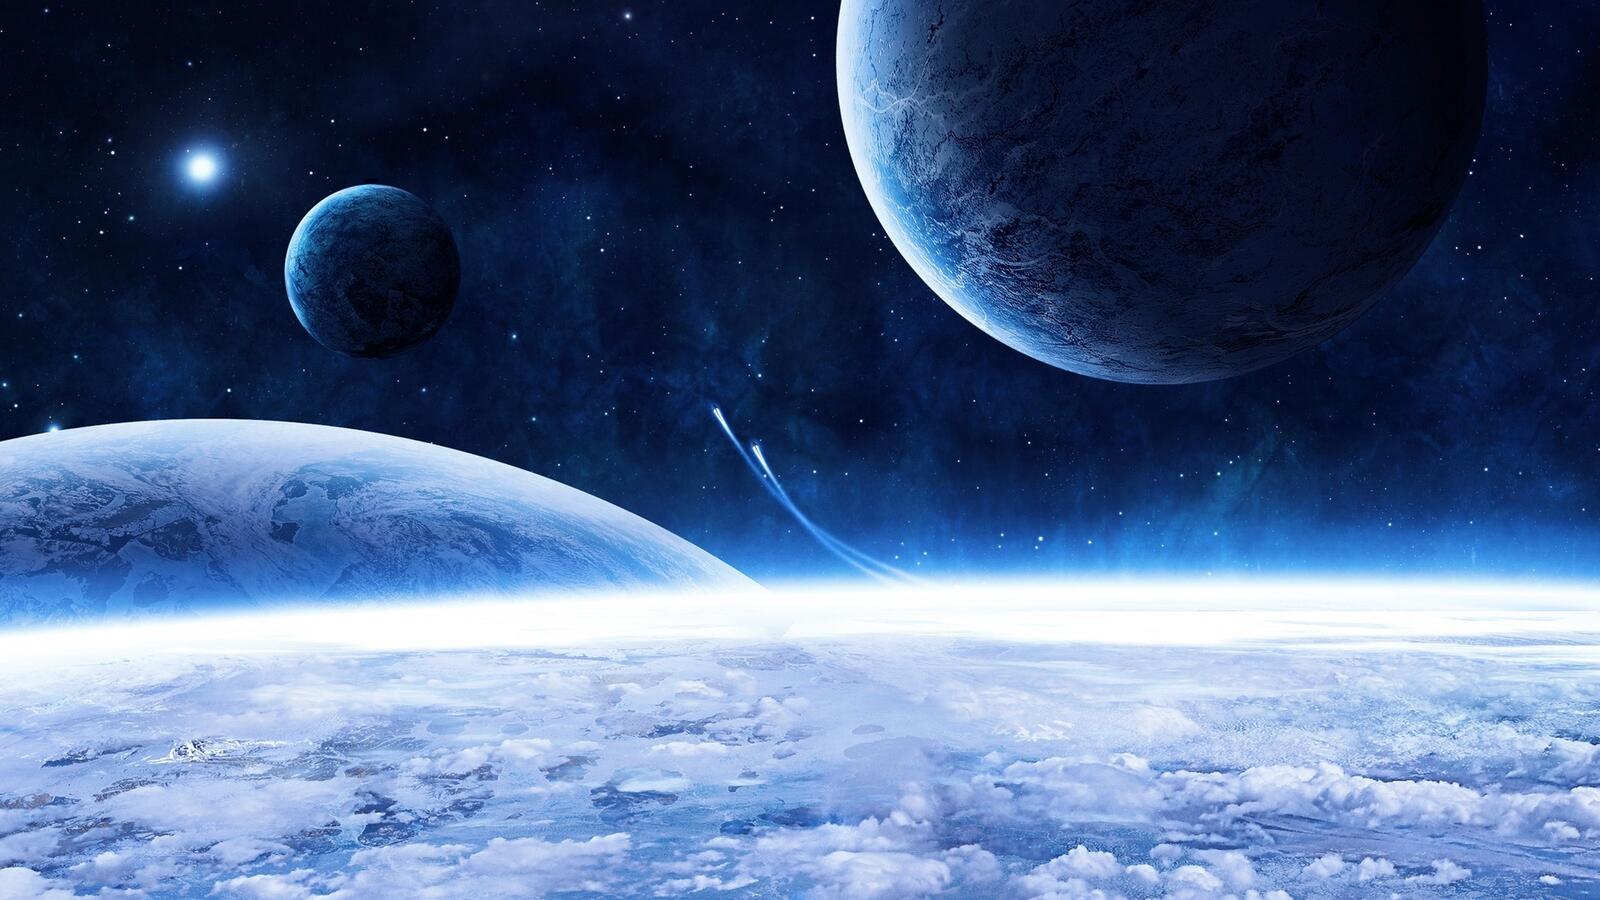 Wallpapers space temnyy planets on the desktop